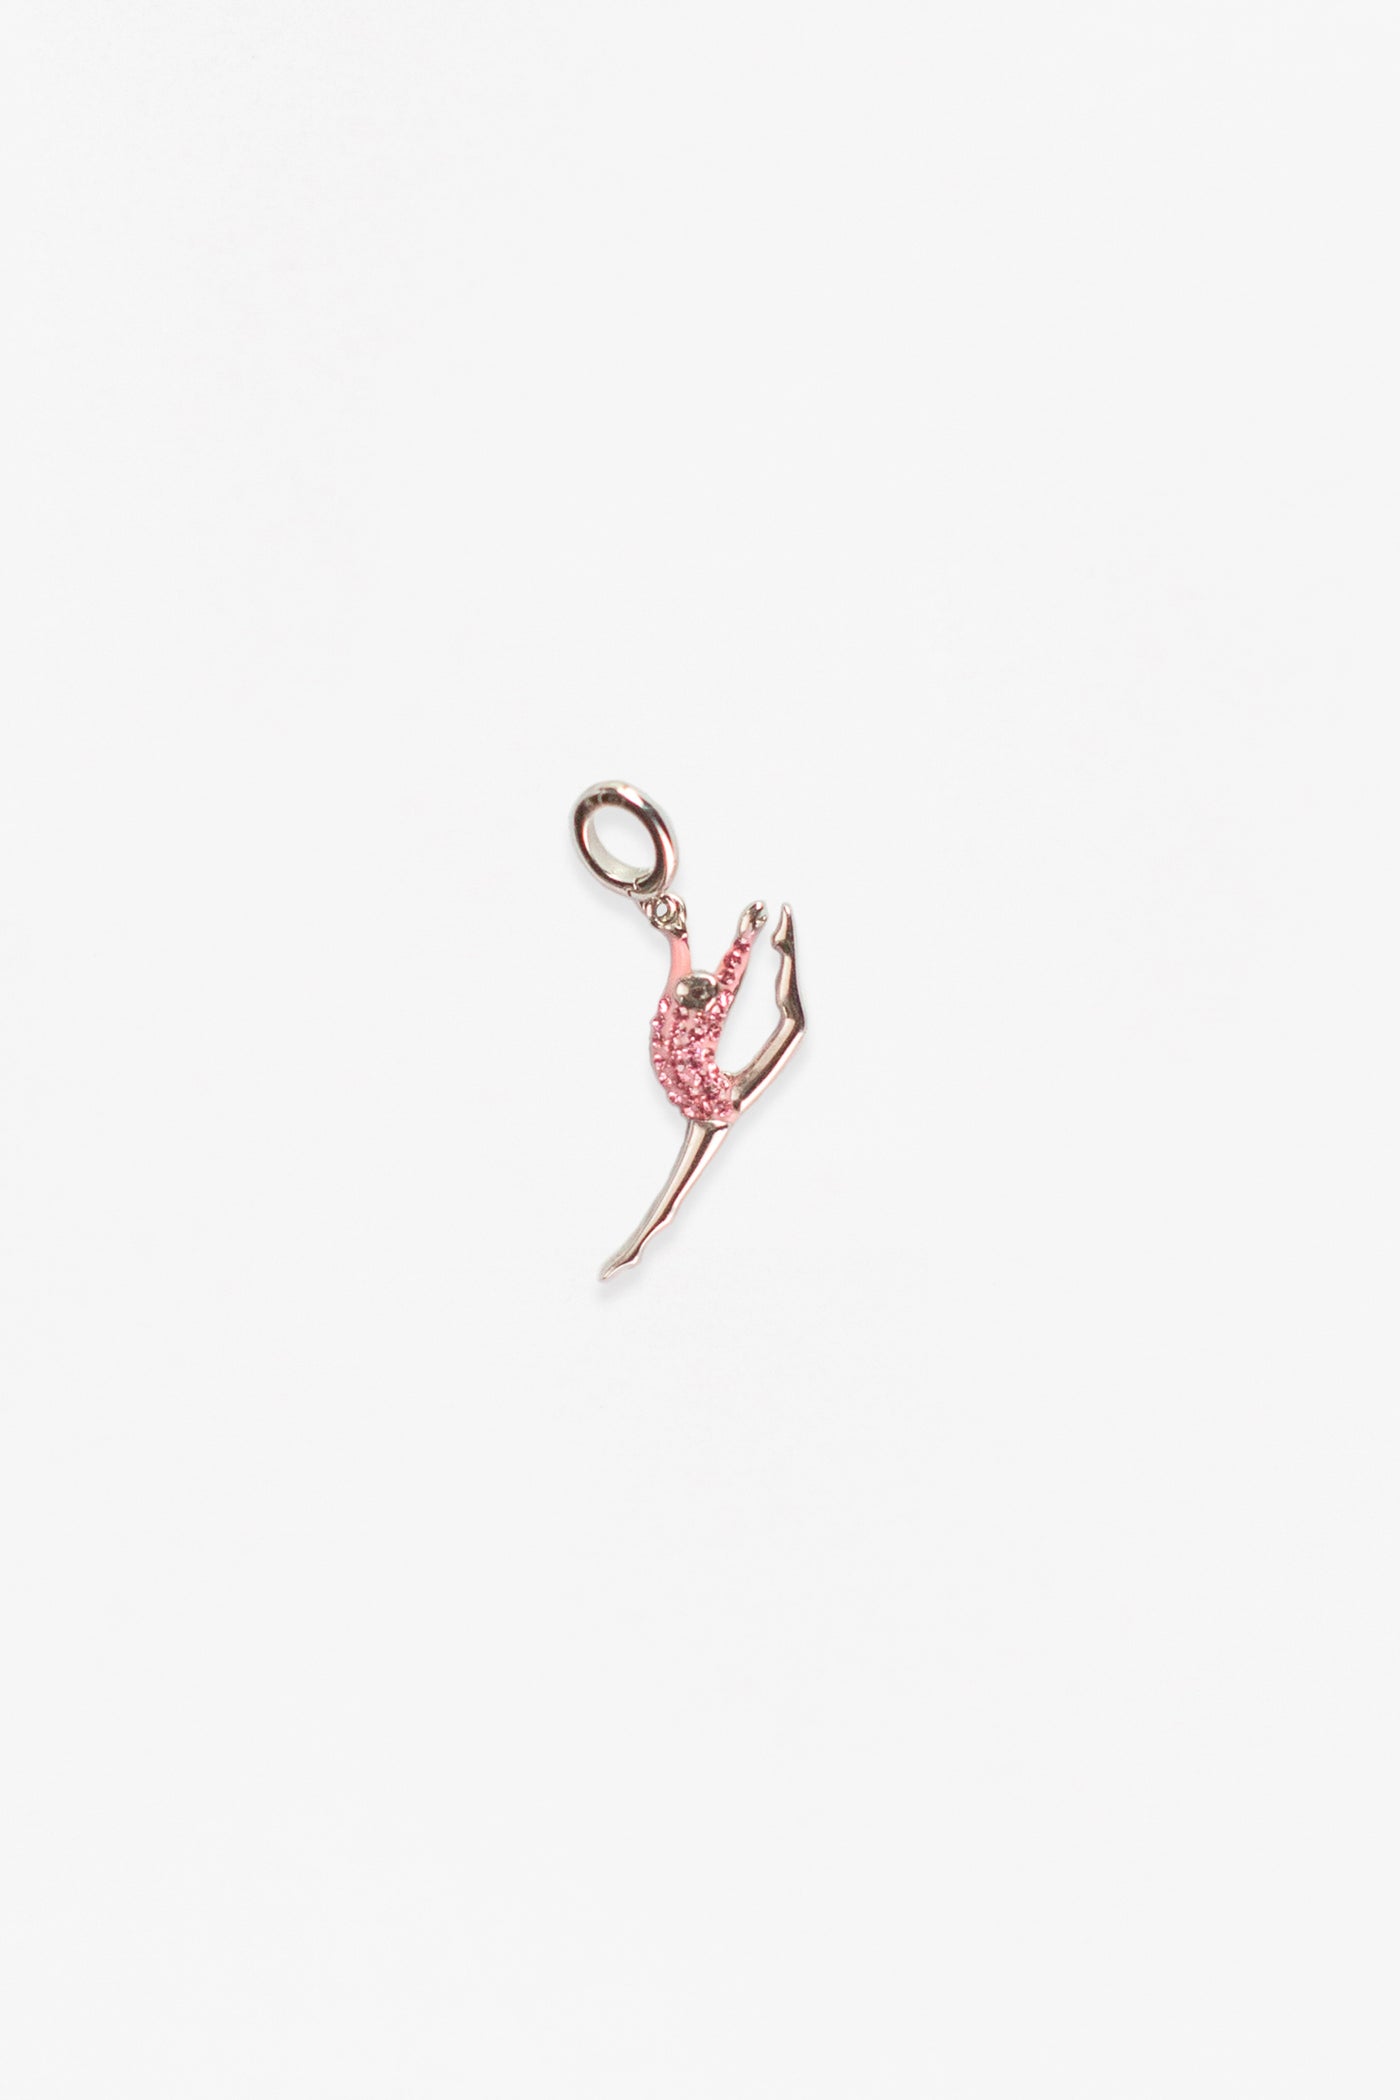 Gymnast Leap In Air Crystal Sterling Silver Charm | Annie and Sisters